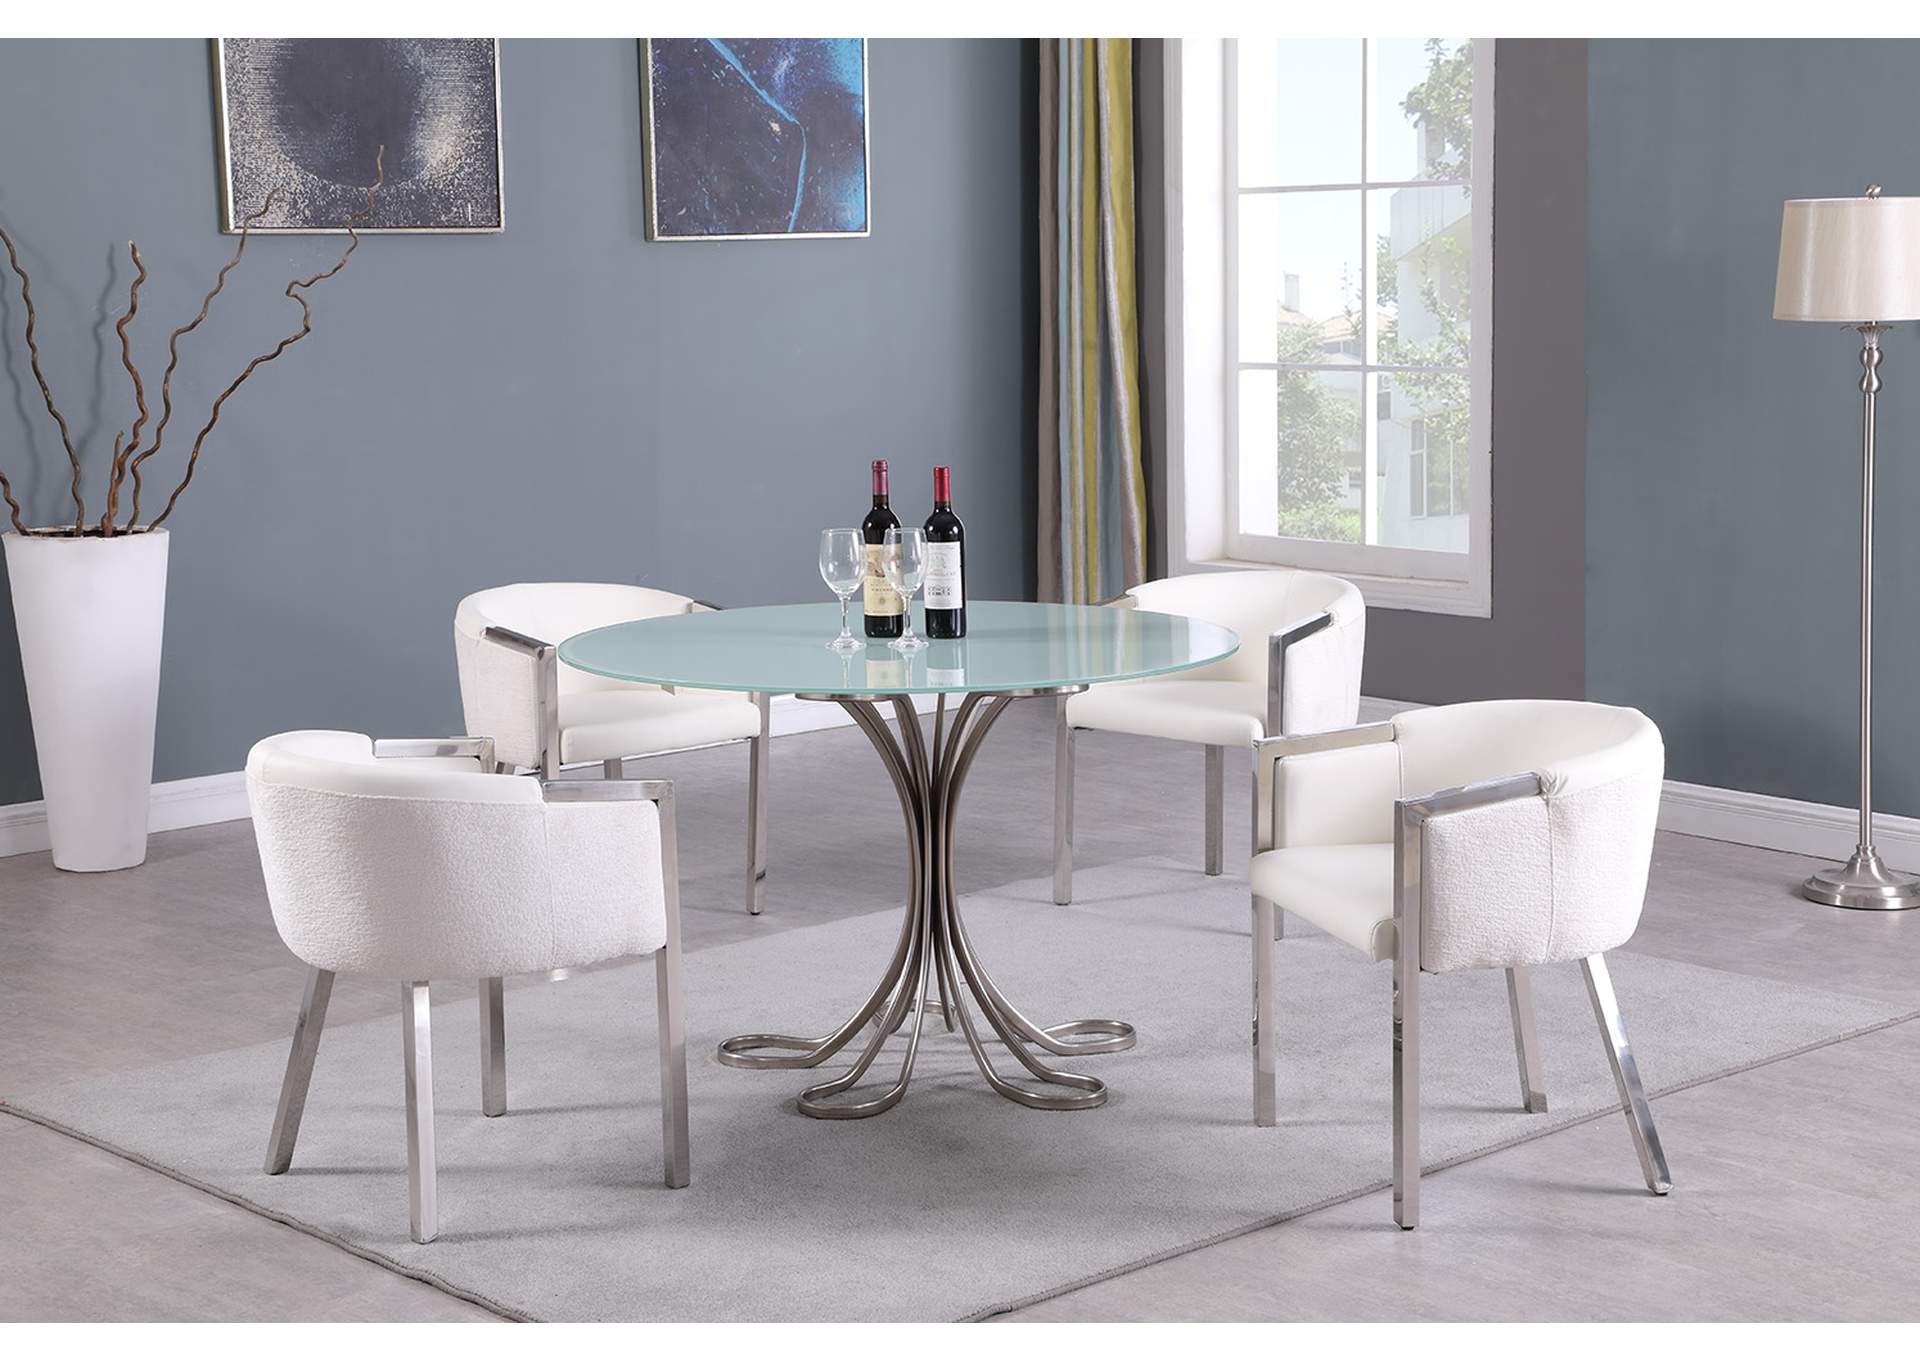 Desiree White Glass Dining Table,Chintaly Imports